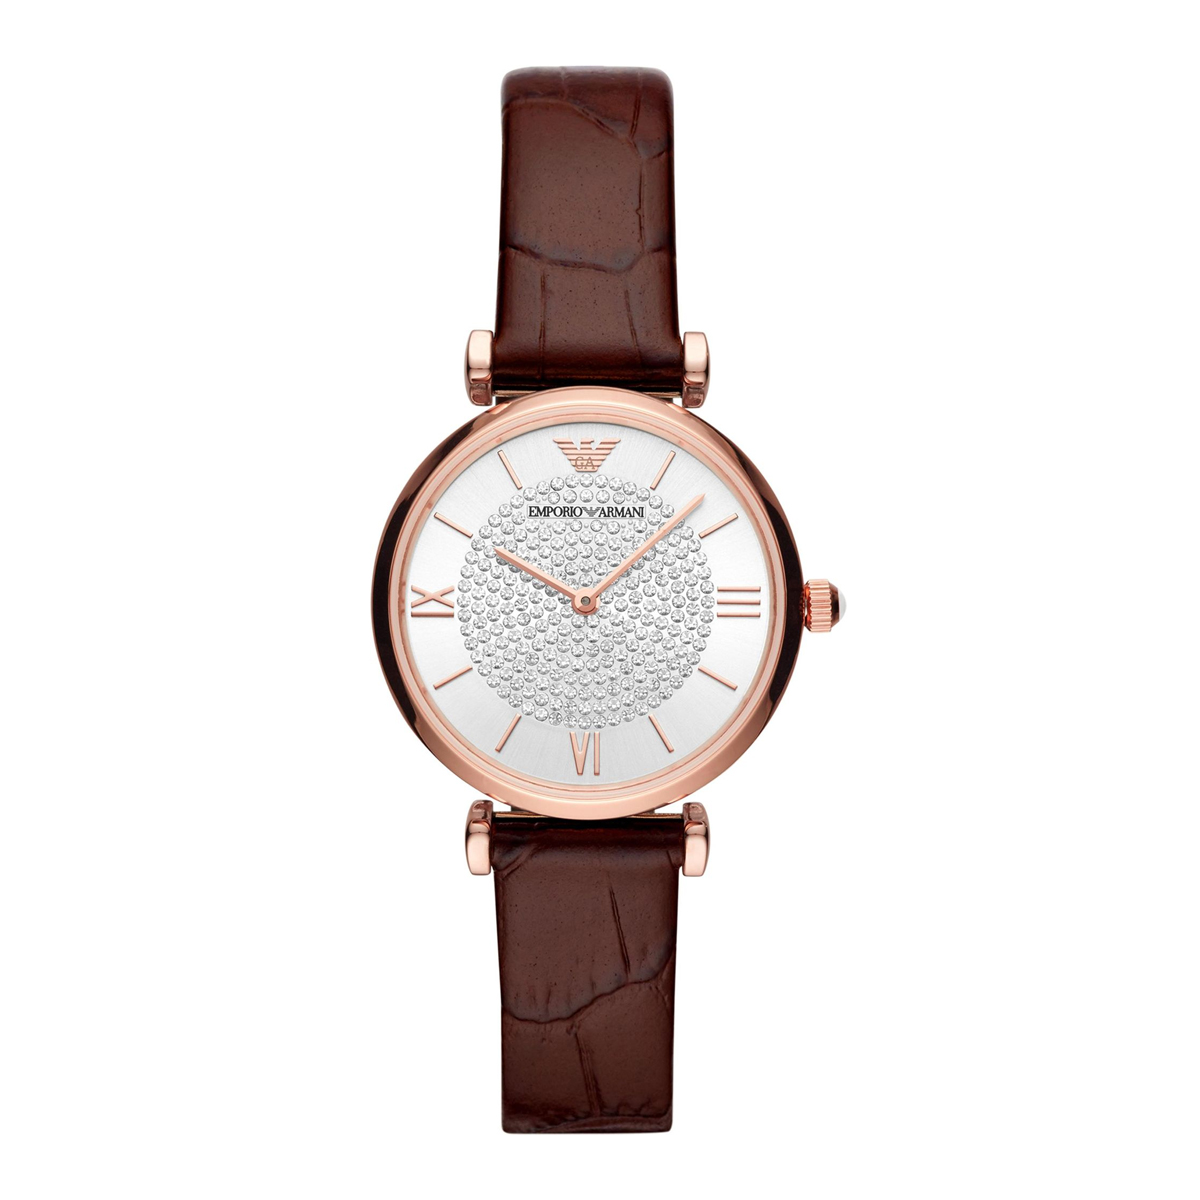 Emporio Armani Gianni T-Bar Watch - Rose & Brown Leather